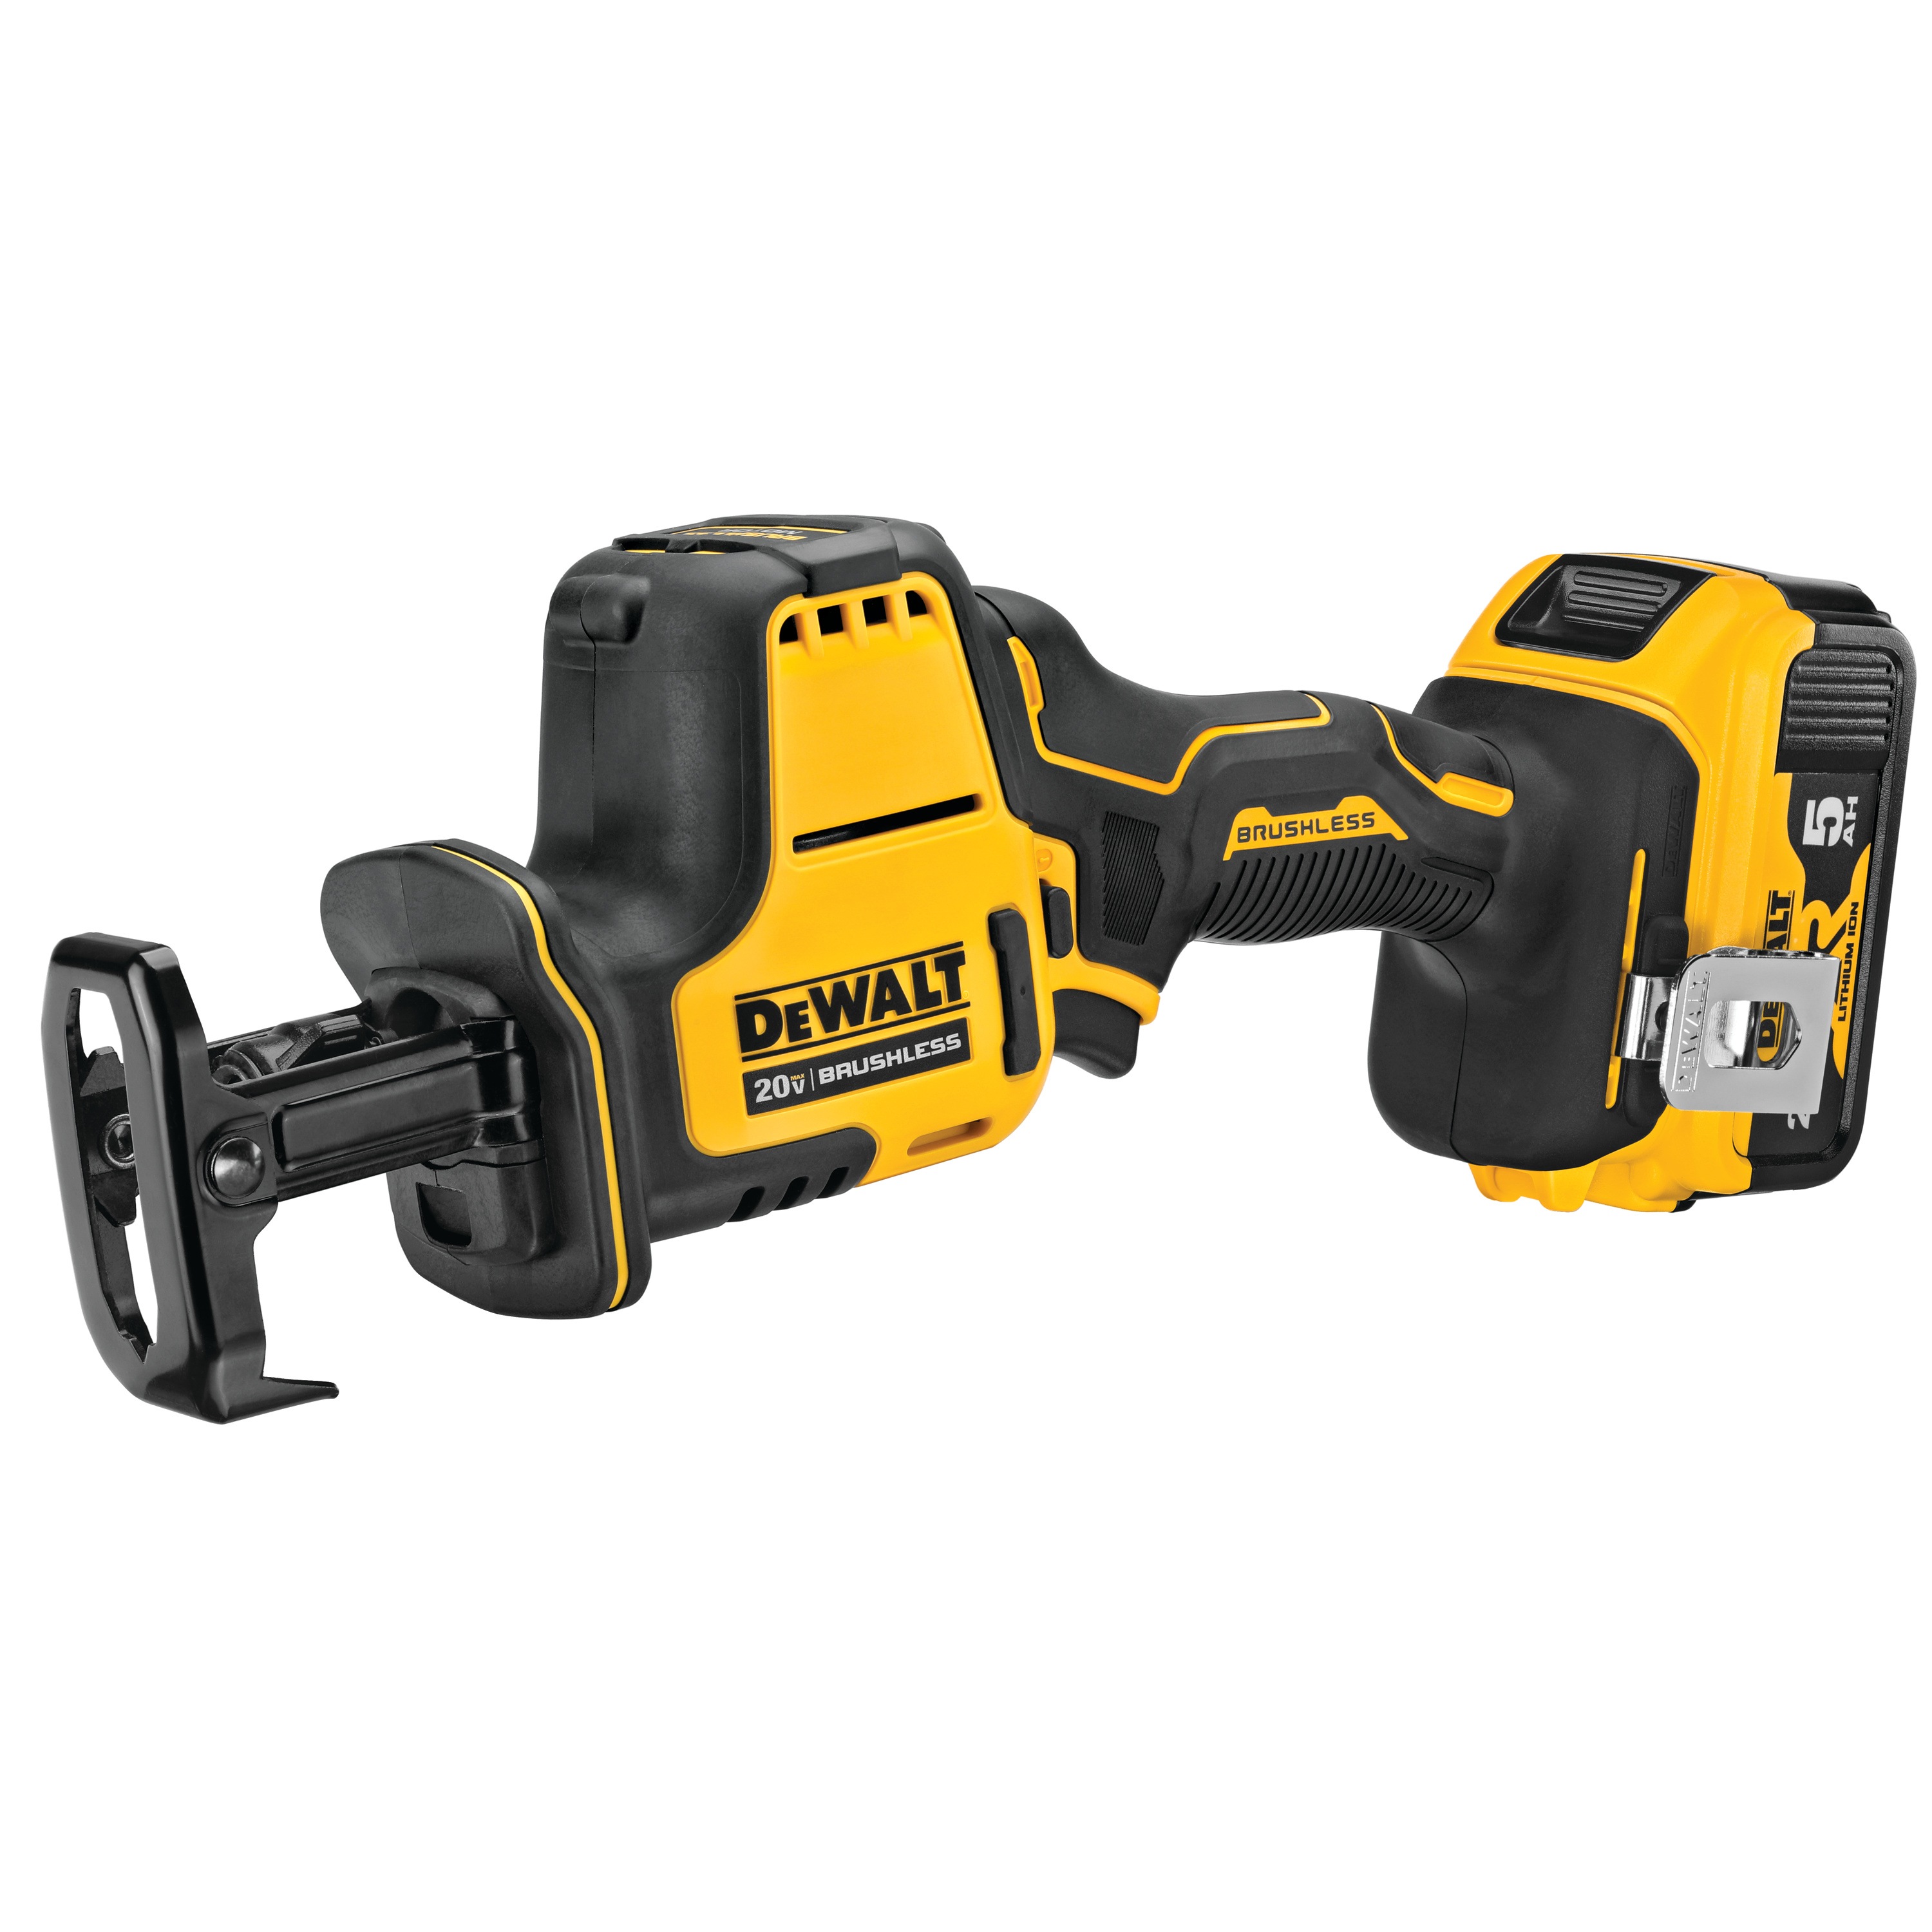 Profile of Cordless One Handed Reciprocating Saw